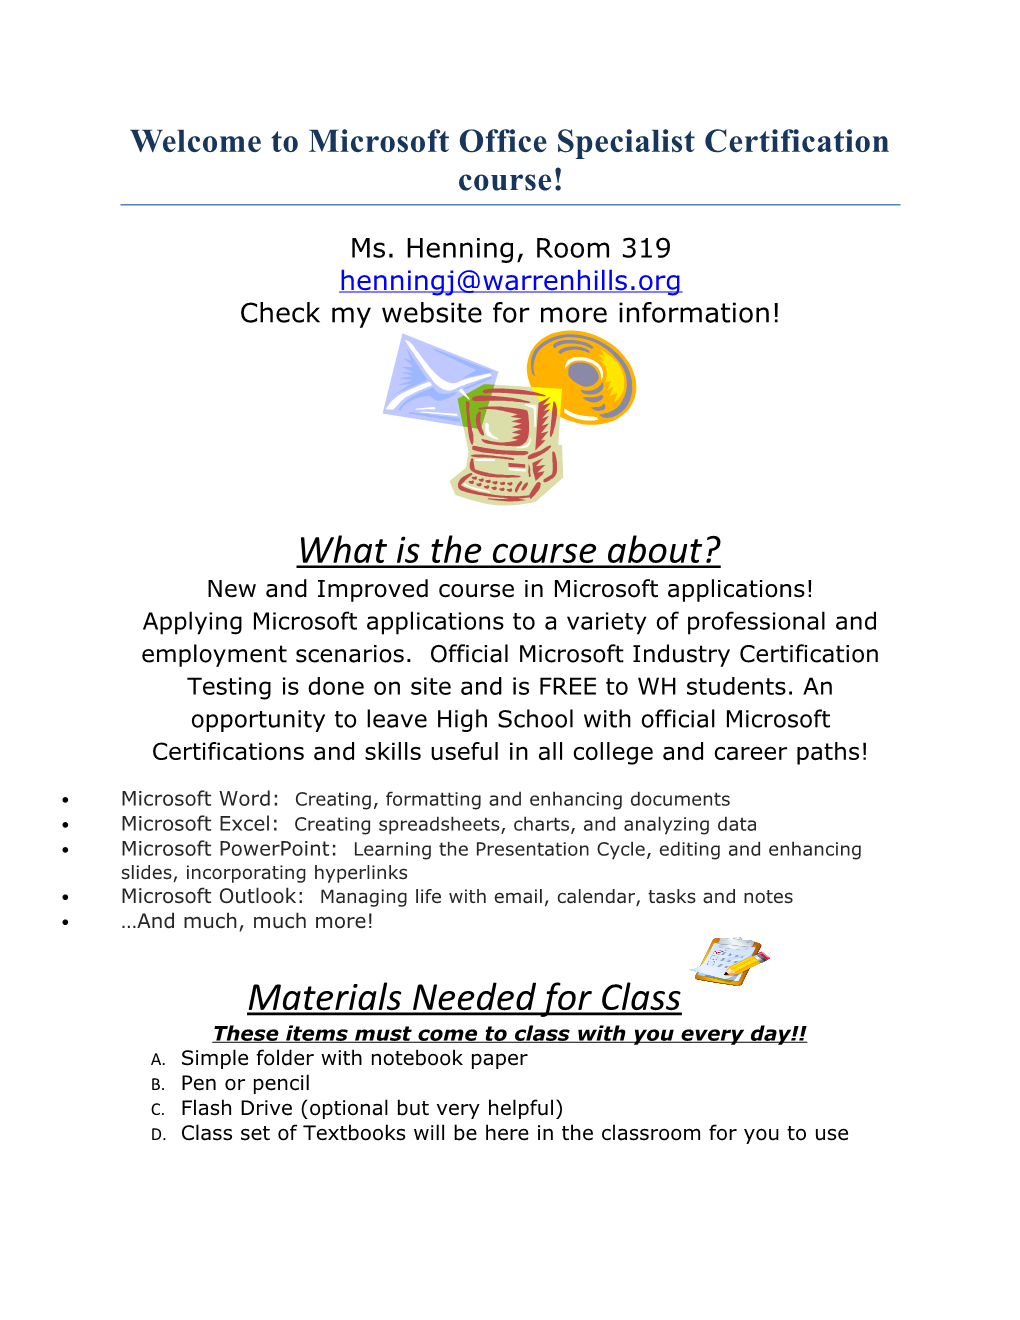 Welcome to Microsoft Office Specialist Certification Course!